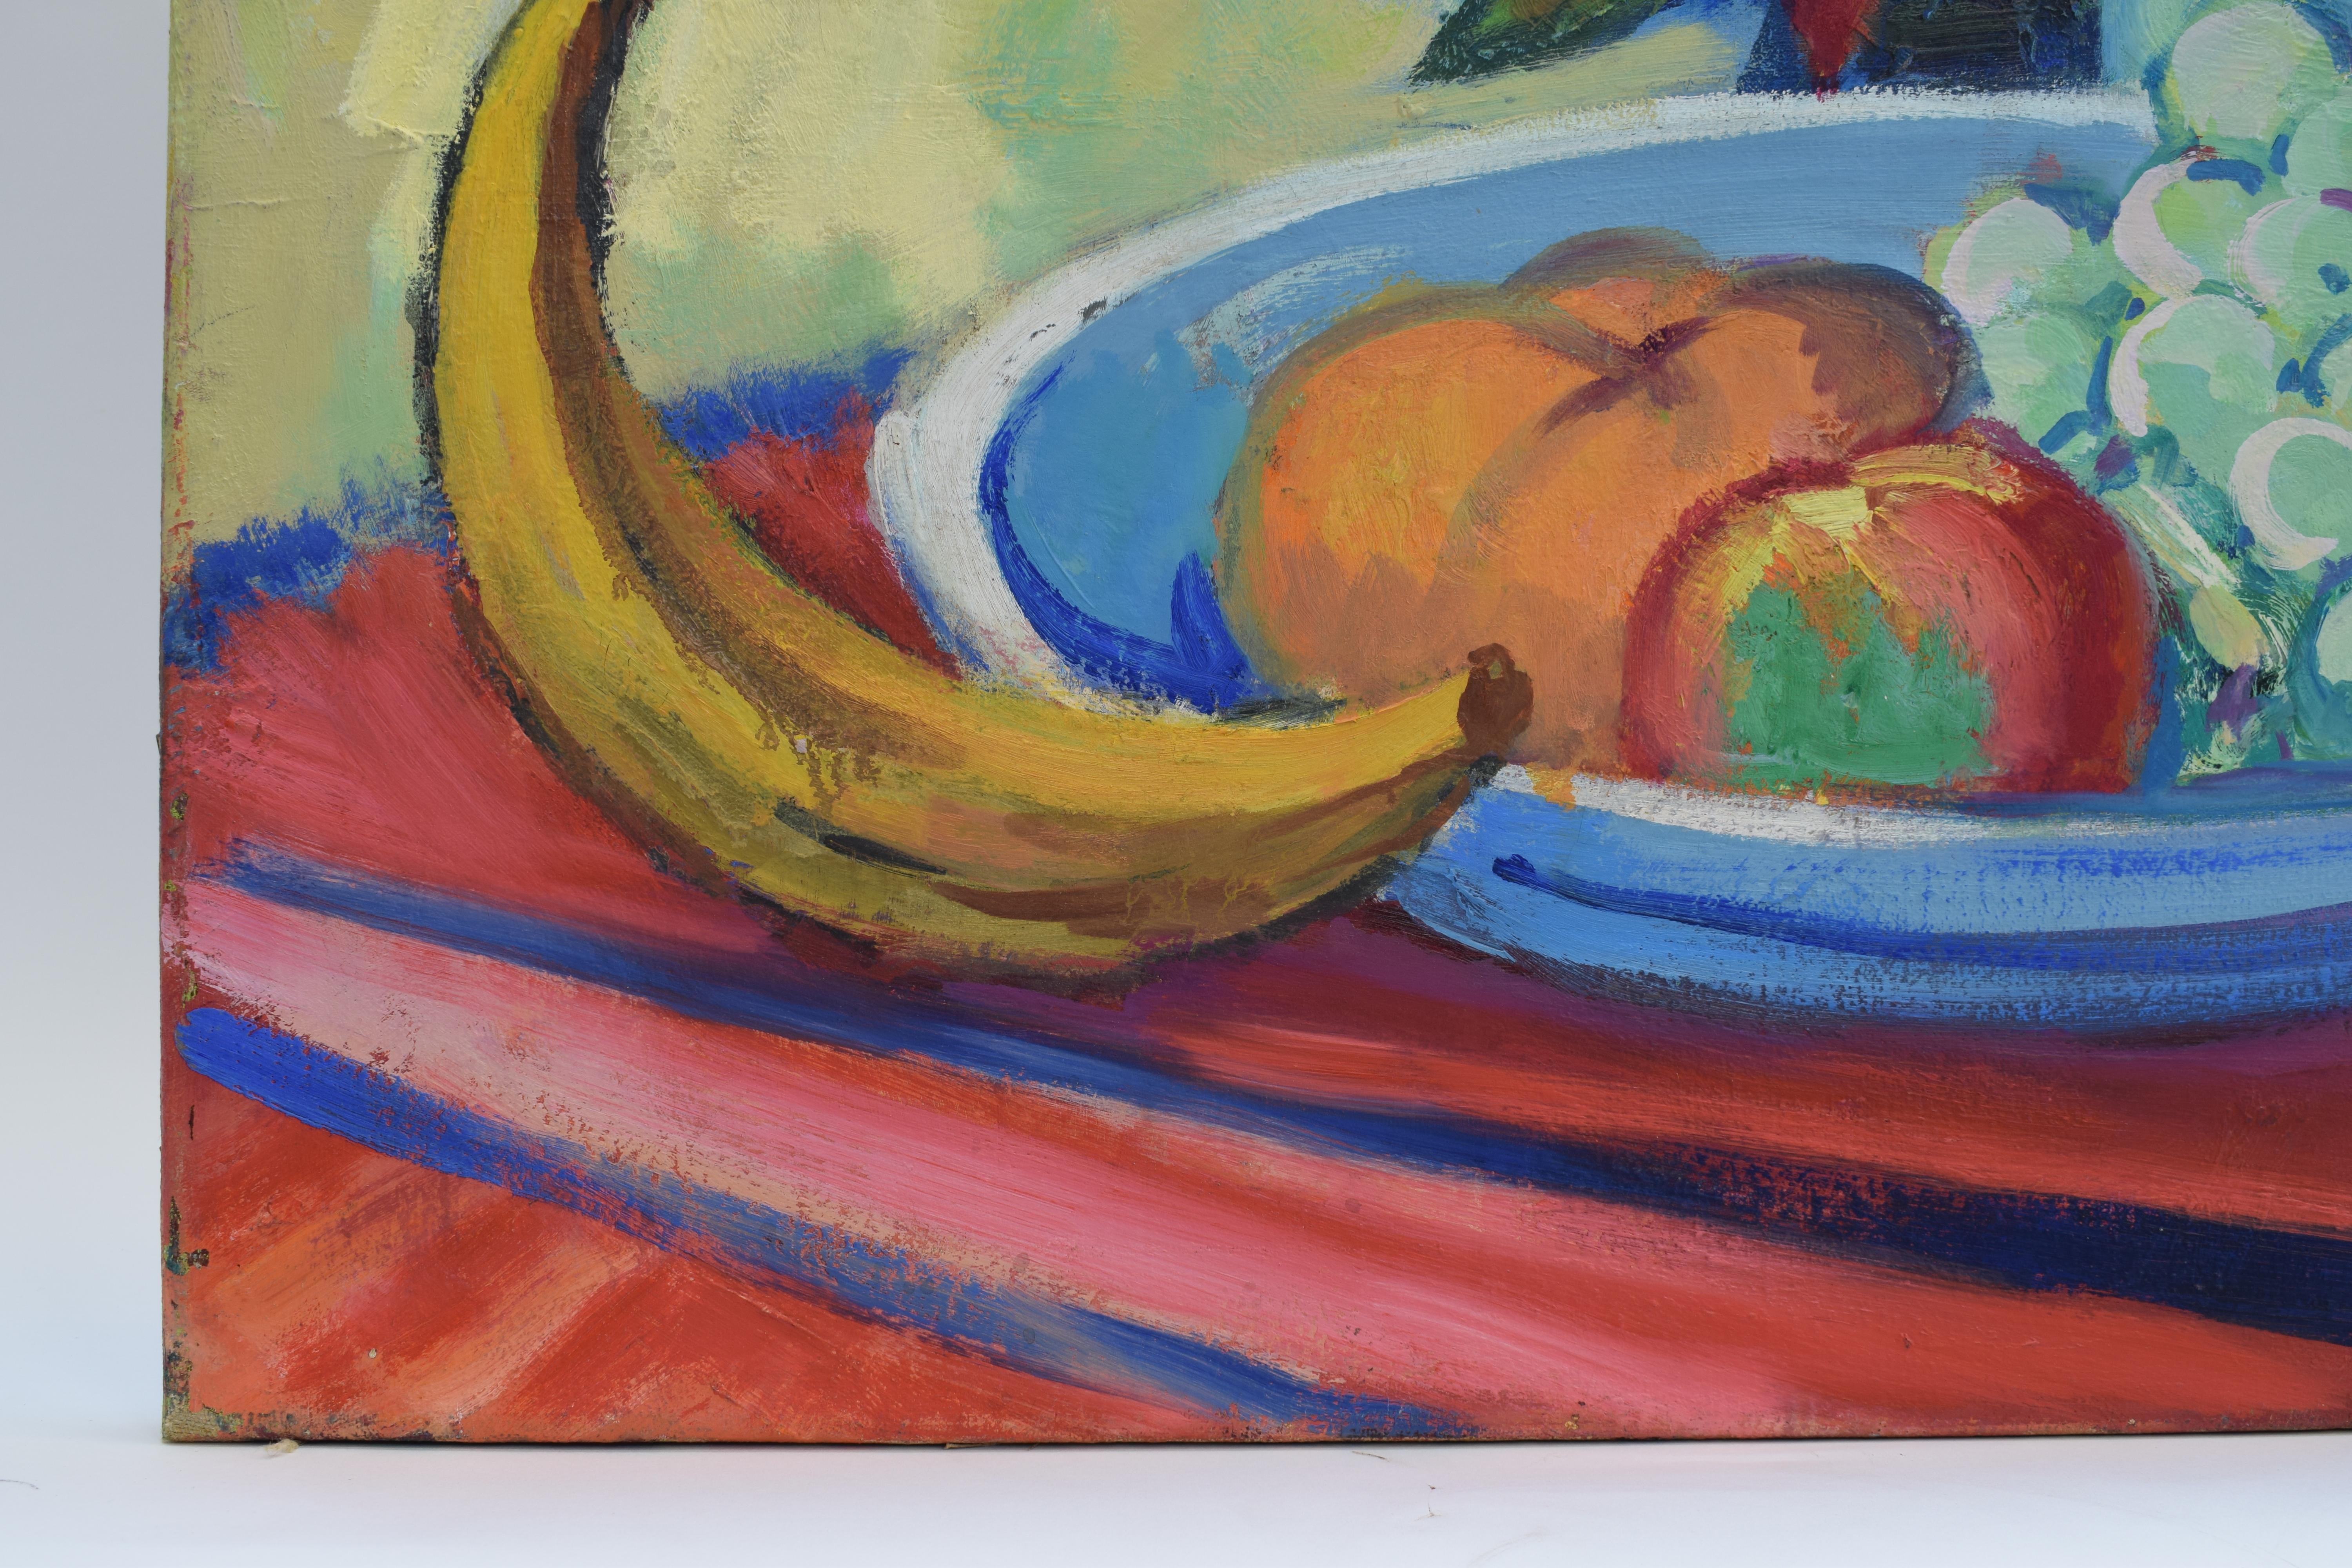  Still life with banana - Oil Paint on Canvas, Fauvist, Dutch Artist, Colorful For Sale 4